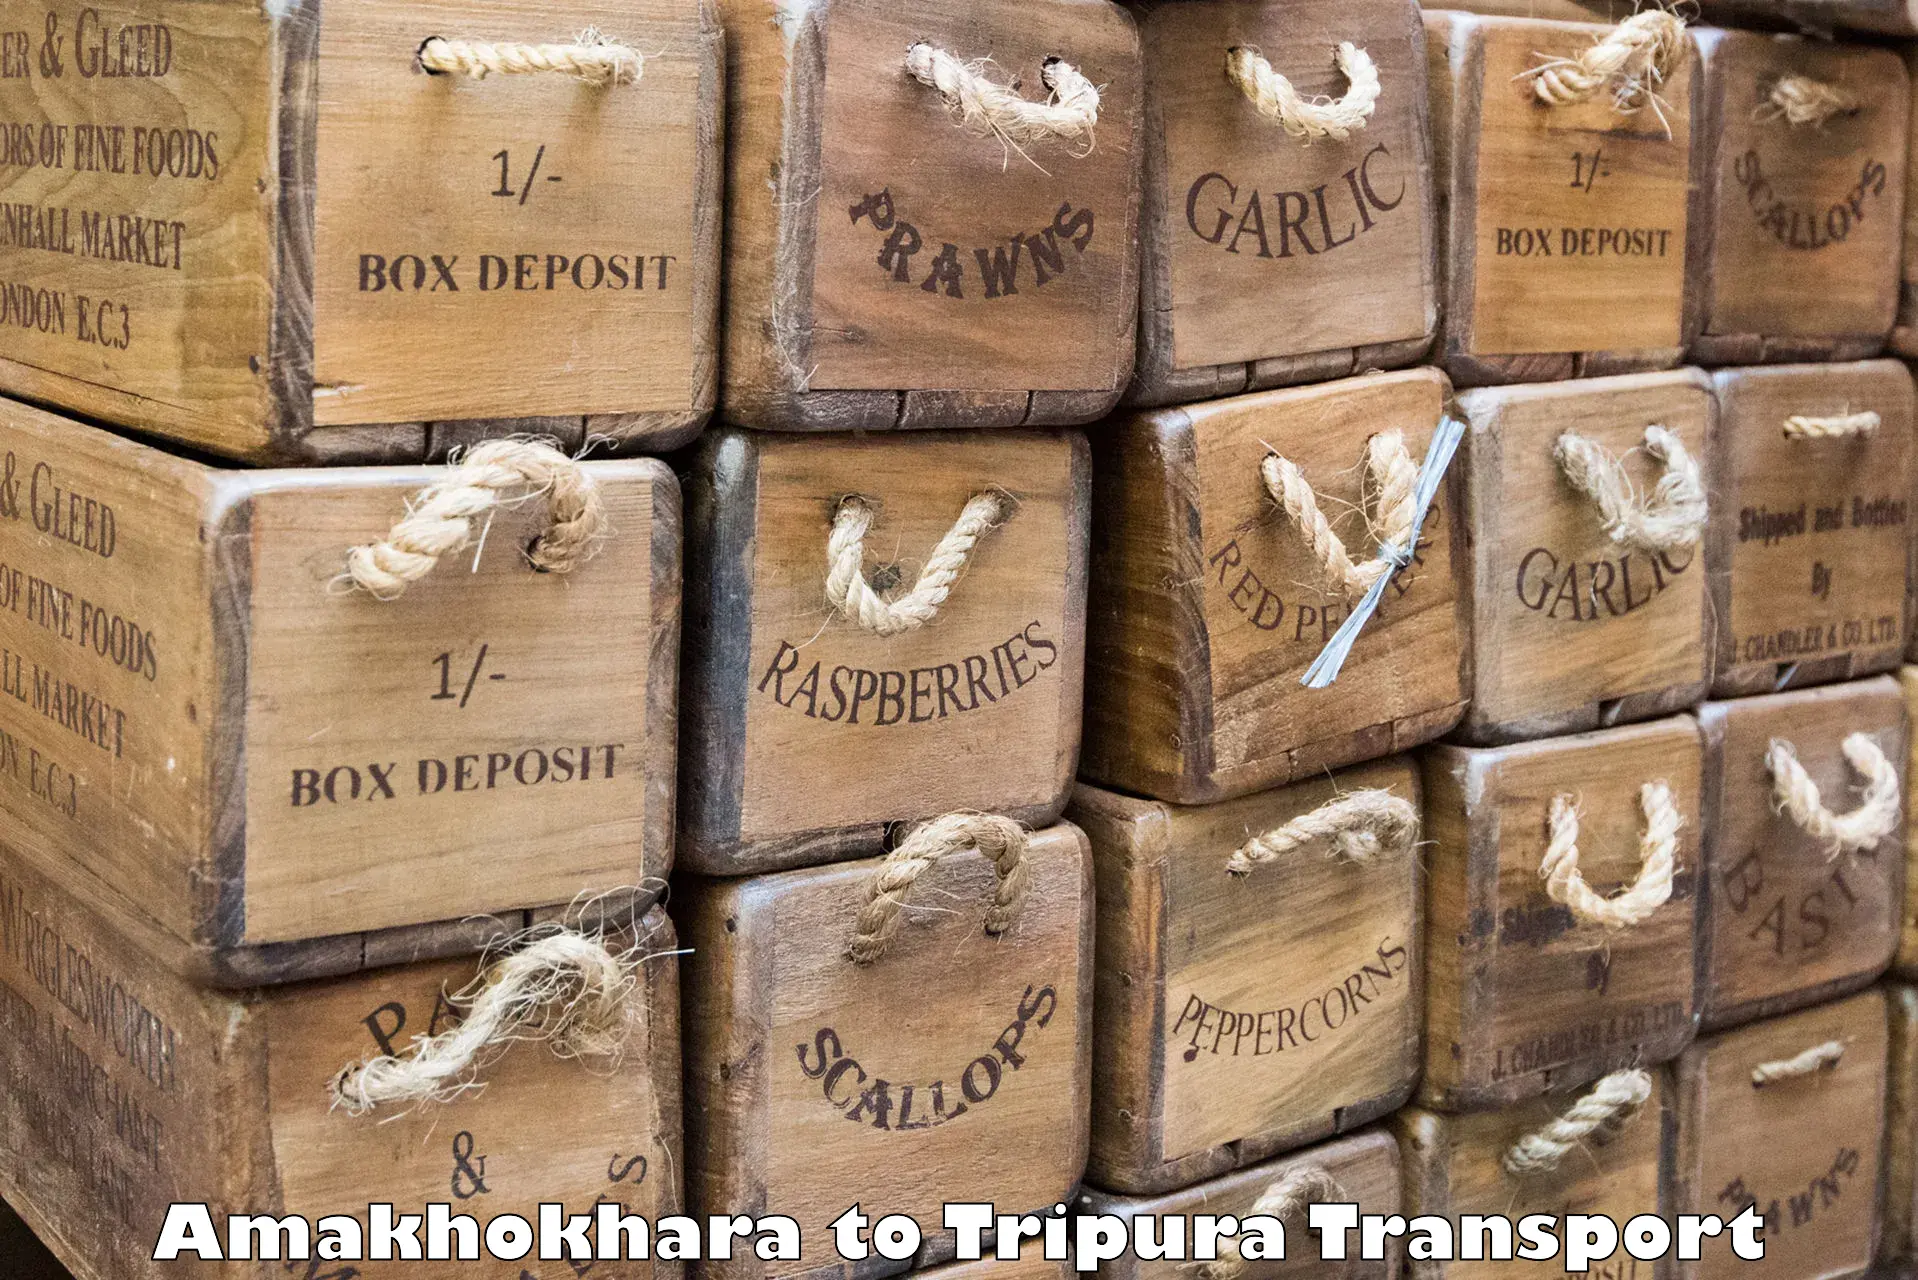 Vehicle transport services in Amakhokhara to North Tripura